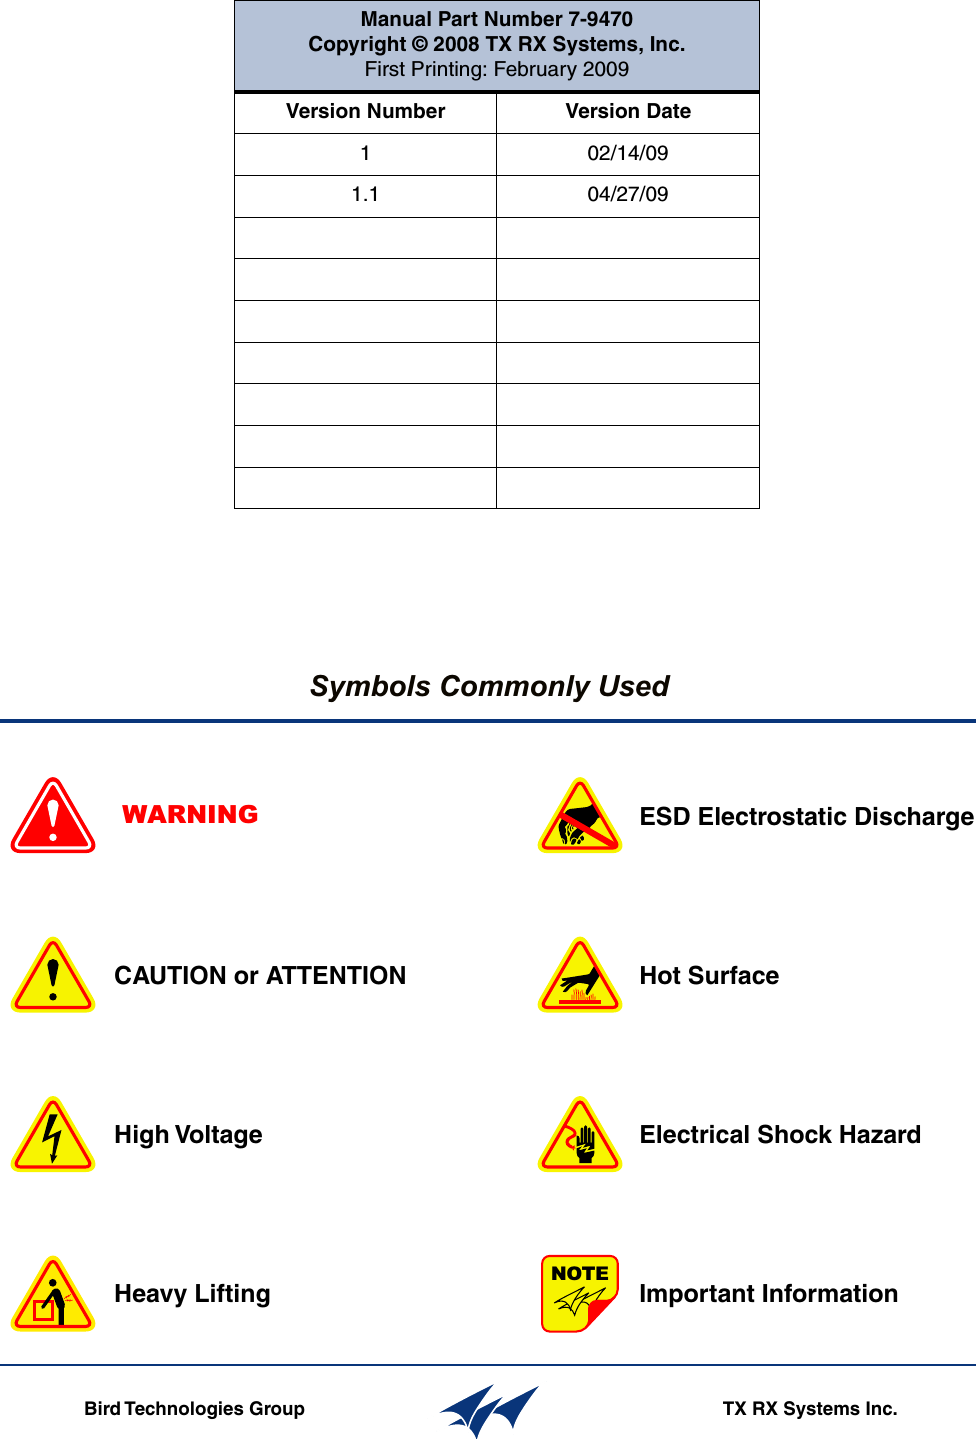 Symbols Commonly UsedWARNING                ESD Electrostatic DischargeHot SurfaceElectrical Shock HazardImportant InformationCAUTION or ATTENTIONHigh VoltageHeavy LiftingBird Technologies Group TX RX Systems Inc.NOTEManual Part Number 7-9470Copyright © 2008 TX RX Systems, Inc.First Printing: February 2009Version Number Version Date1 02/14/091.1 04/27/09